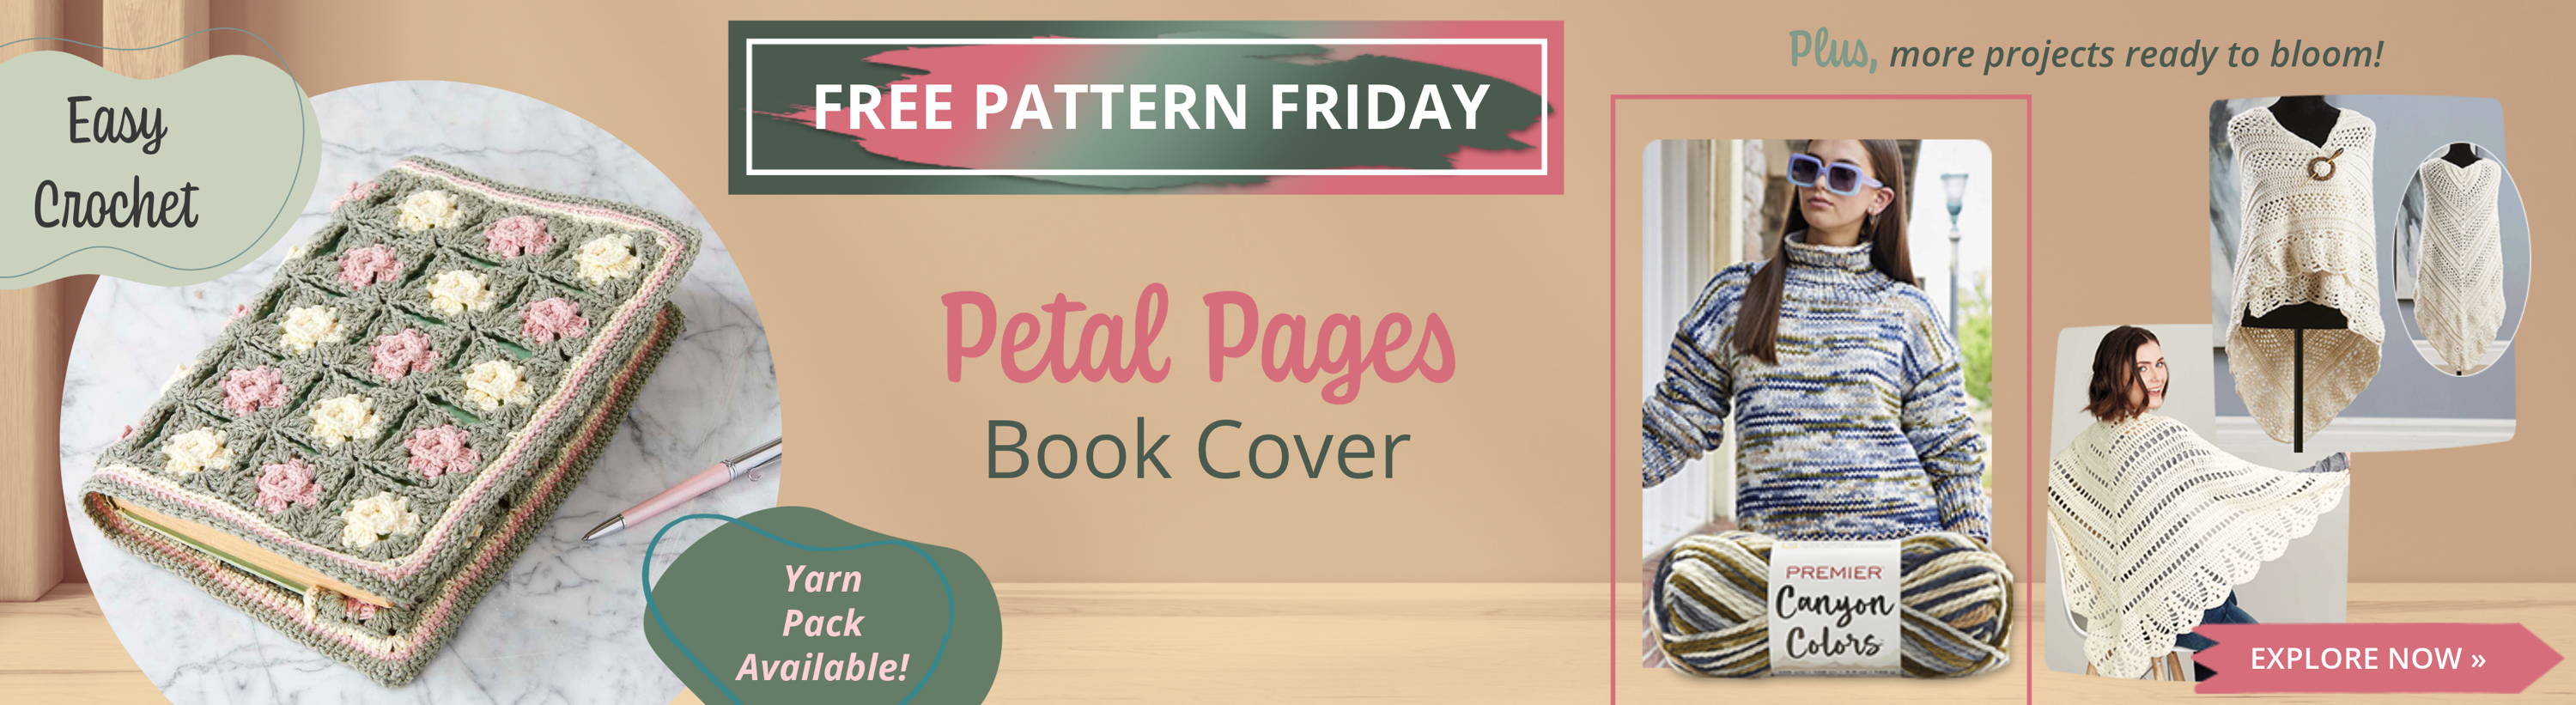 Free Pattern Friday! Petal Pages Book Cover (Easy Crochet). Image: Petal Pages Book Cover and featured crochet projects to explore.